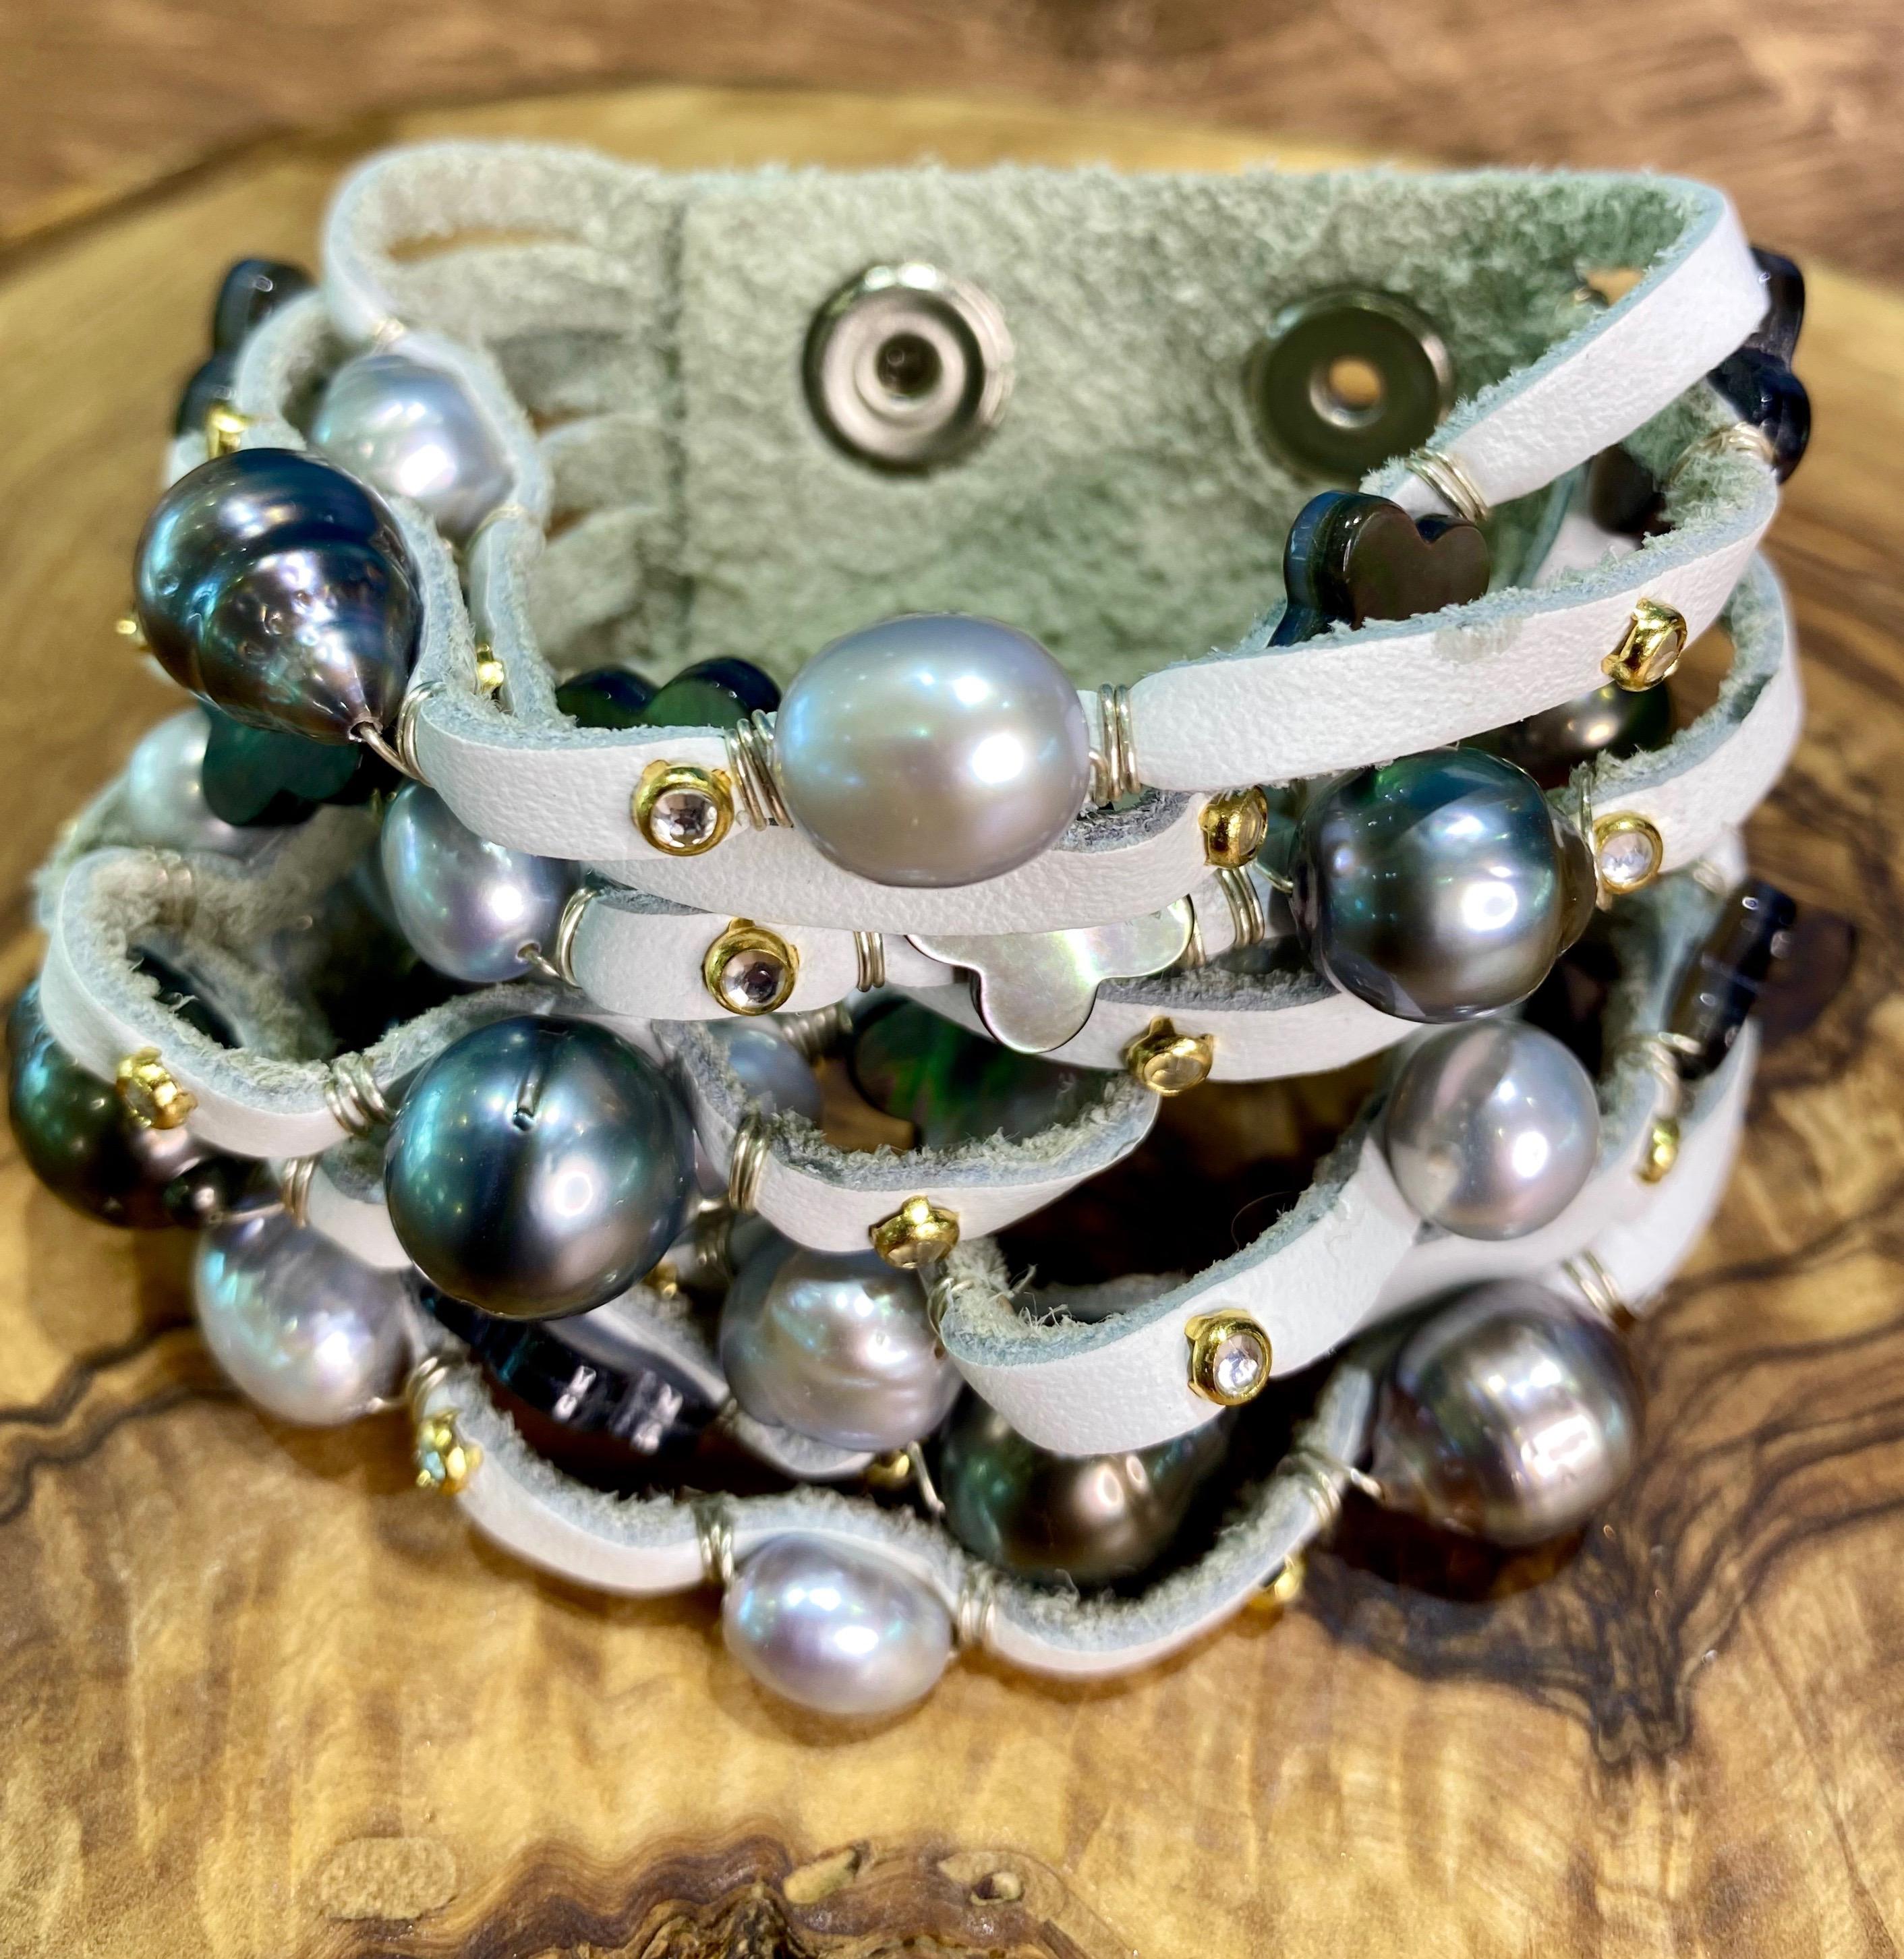 Bijoux De Mer's signature cuff has got the WOW factor with this combination of 10mm Tahitian pearls and silvery freshwater pearls mixed with mother of pearl clovers.  The pearls and stones are hand-wired onto soft, calf skin leather with sterling